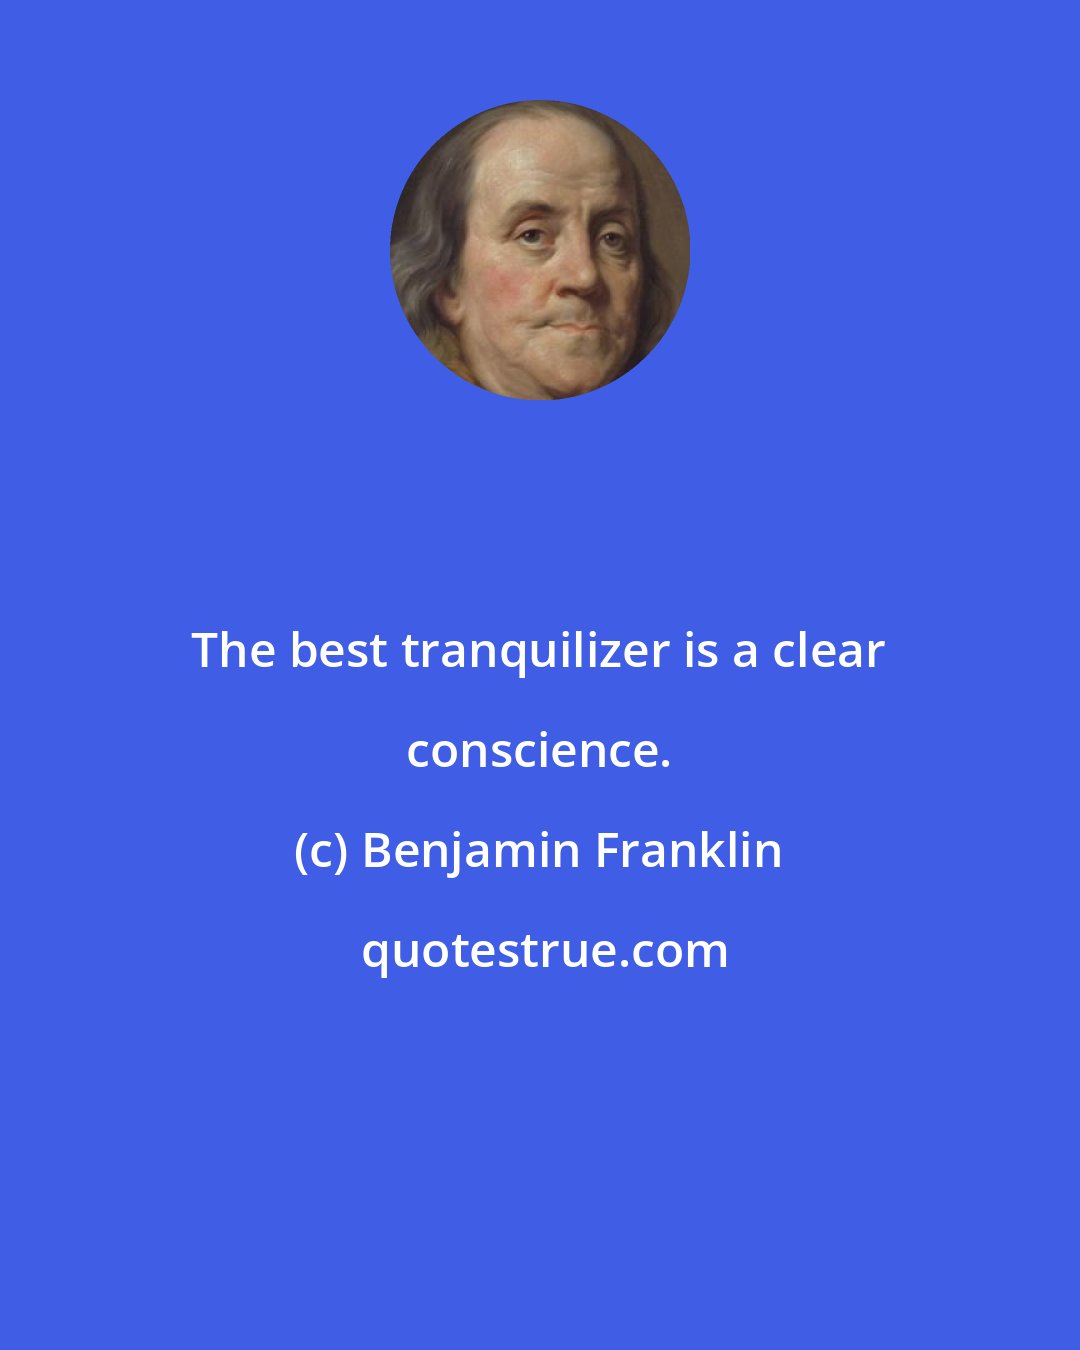 Benjamin Franklin: The best tranquilizer is a clear conscience.